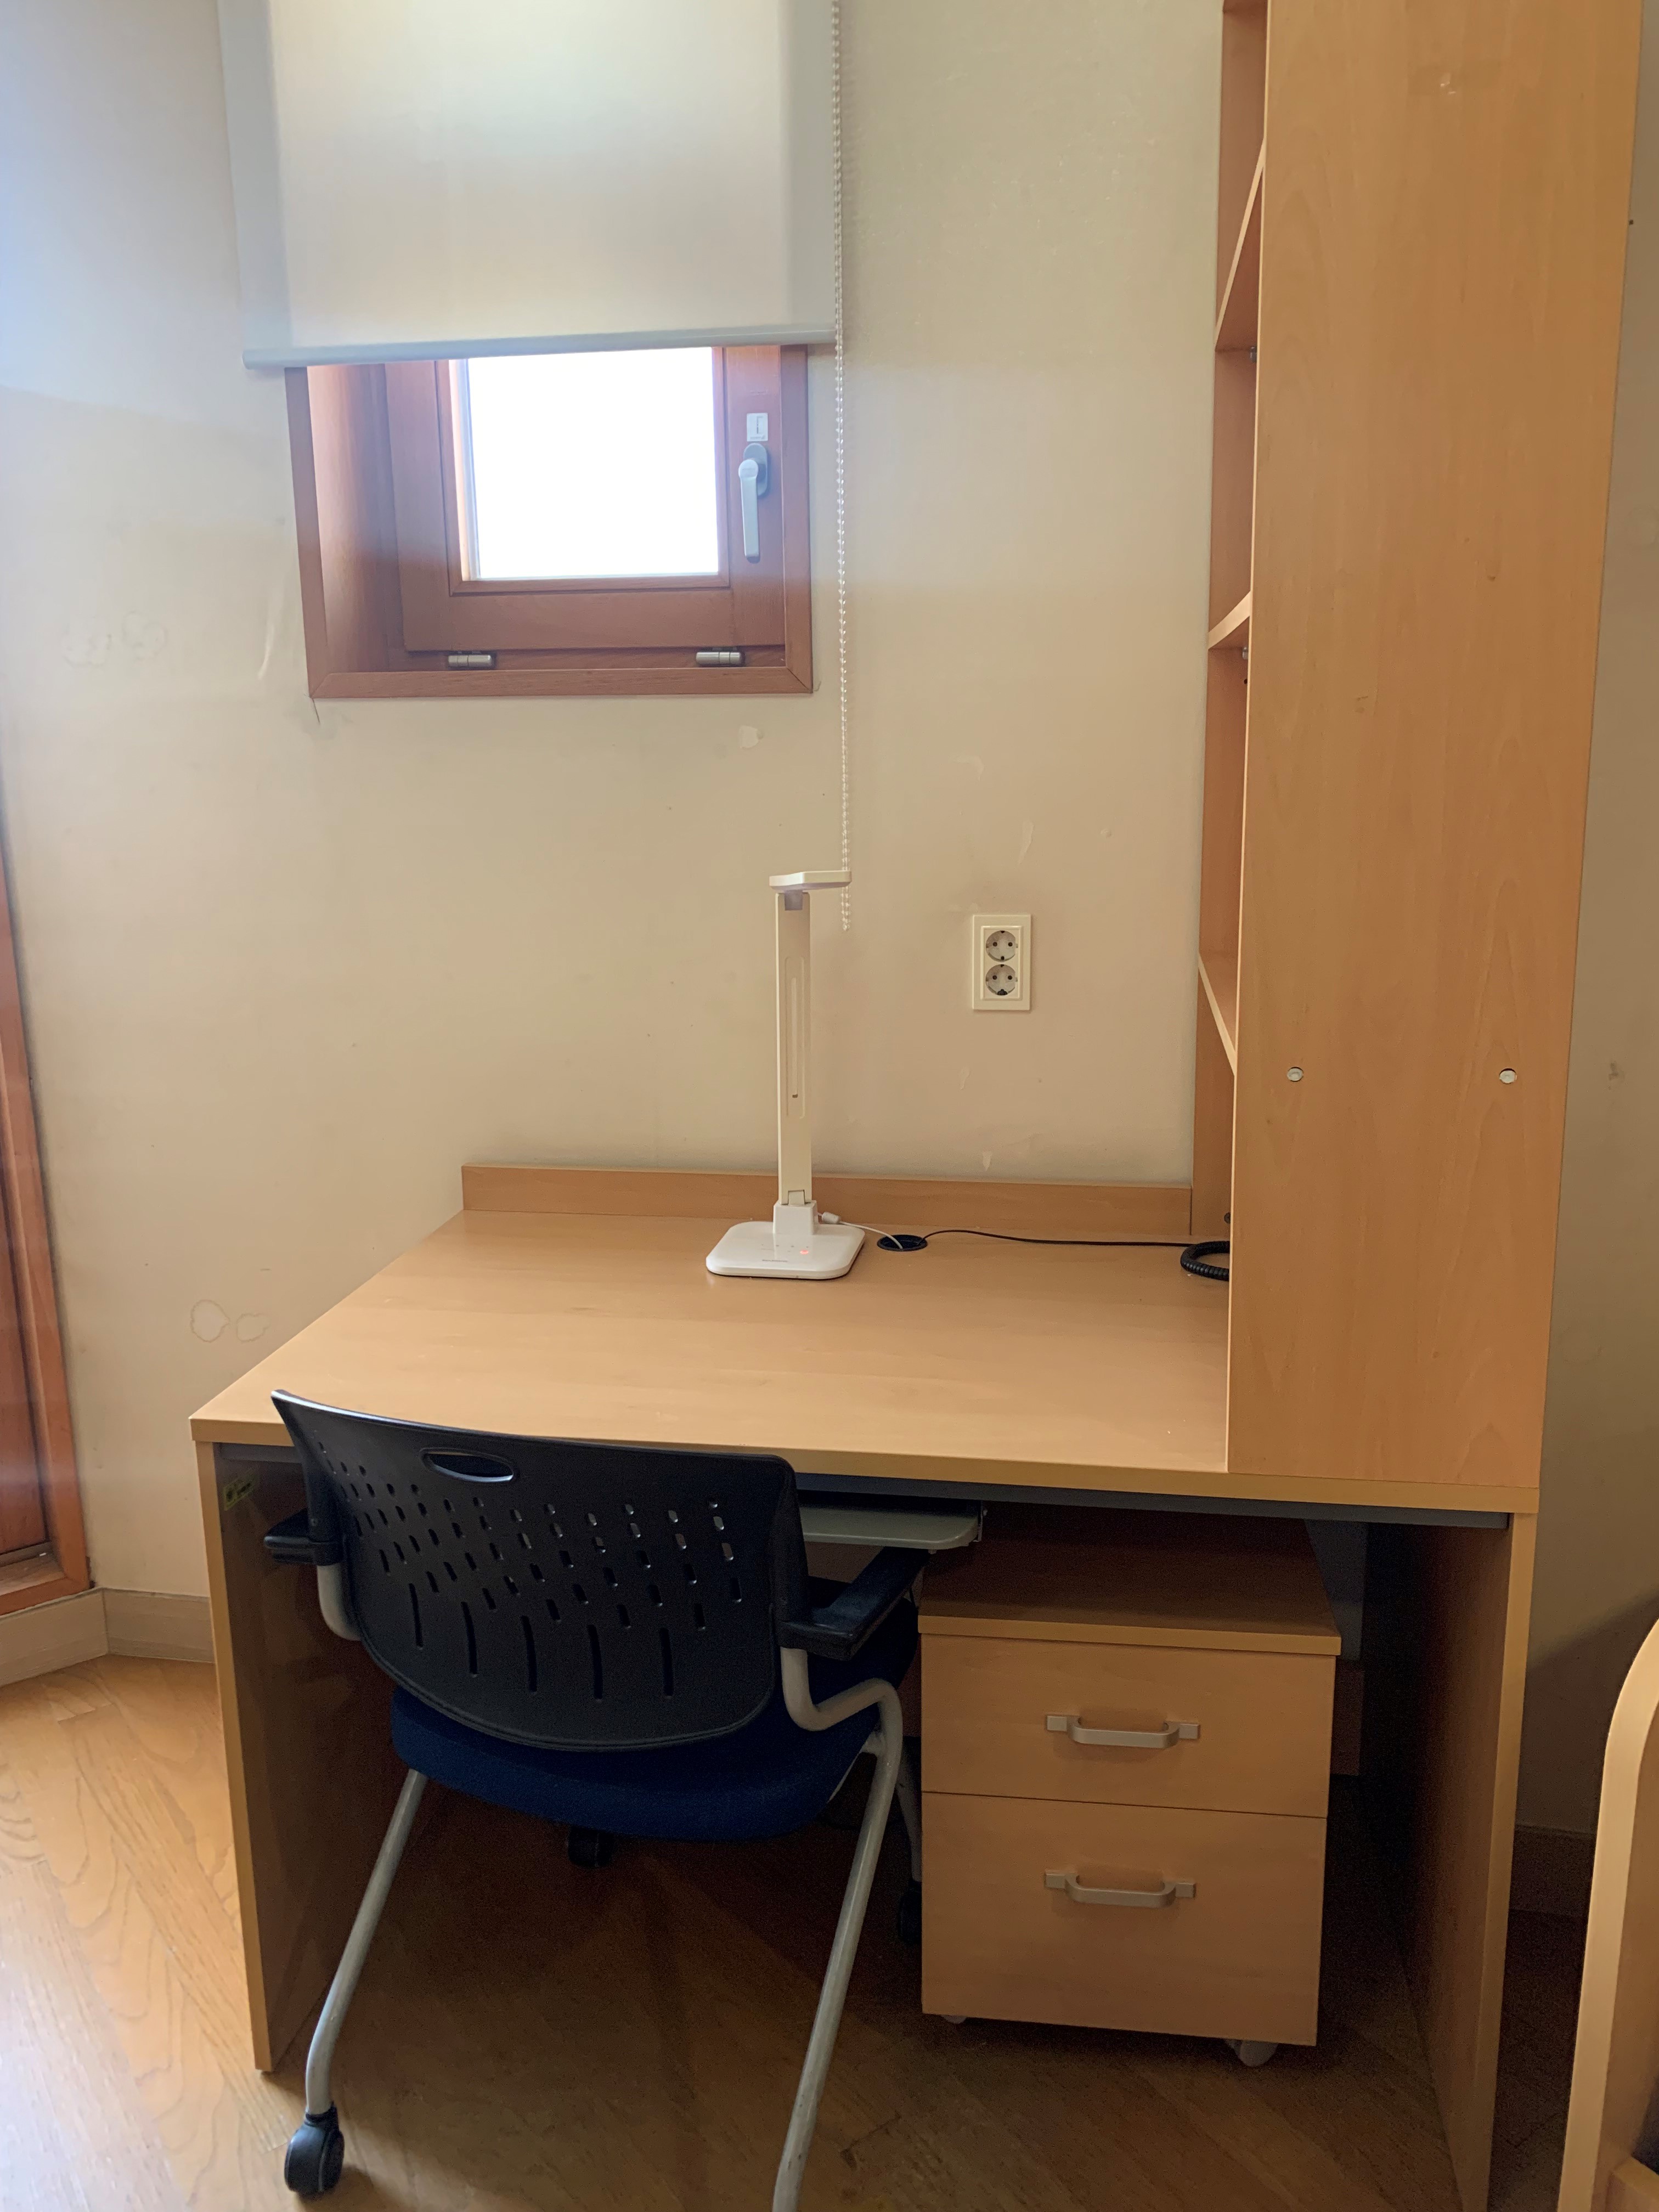 Picture of desk in student dorm